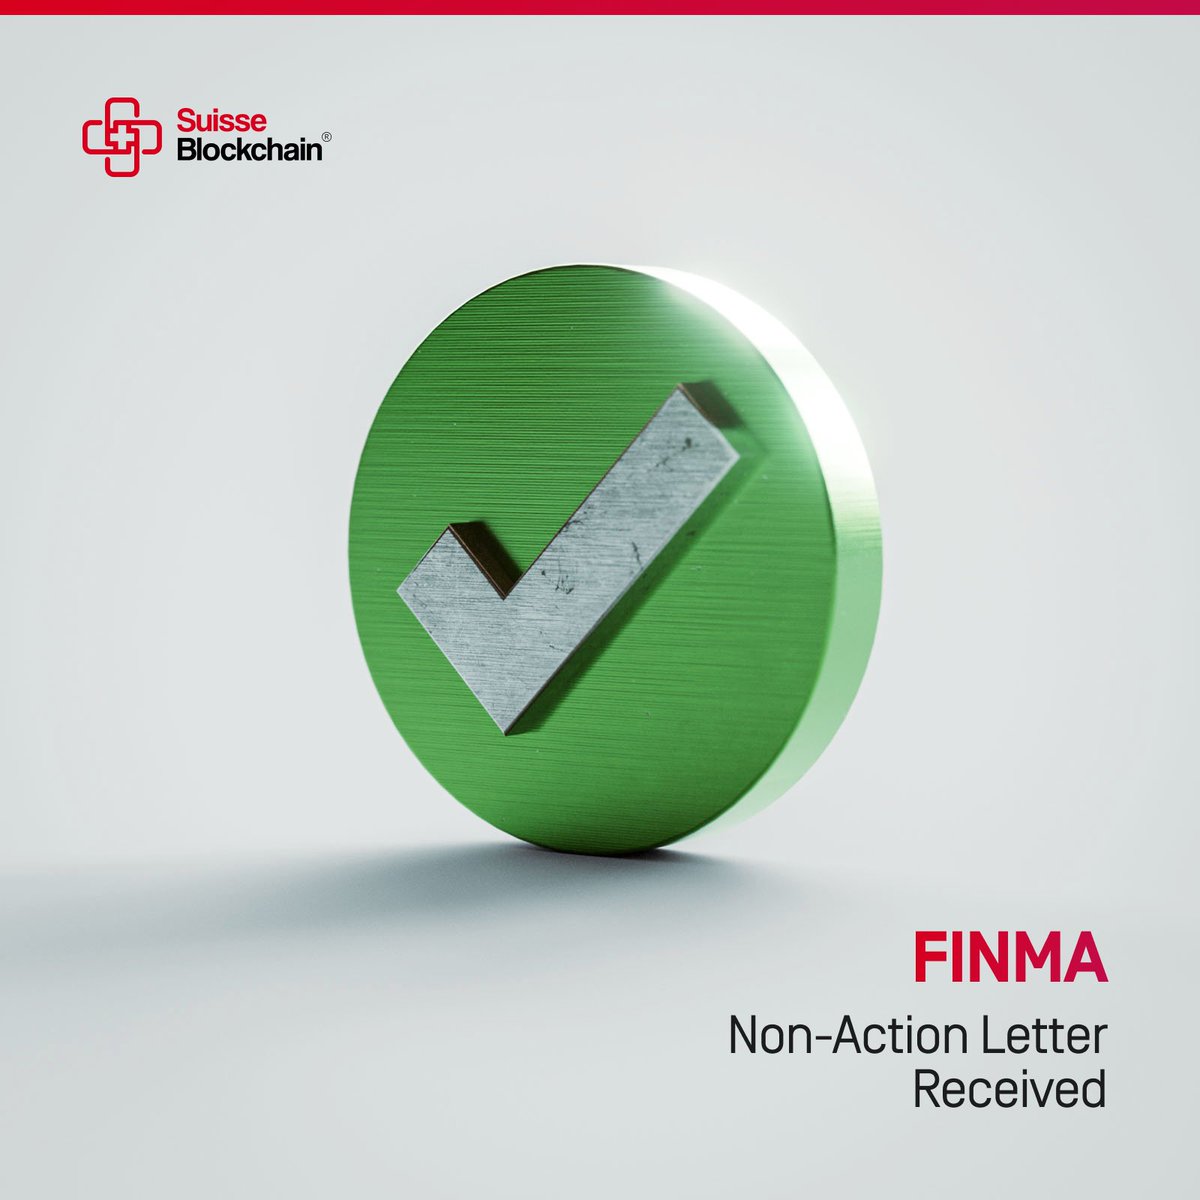 We've received a non-action letter from Swiss Financial Market Supervisory Authority (FINMA), confirming our compliance with Swiss financial regulations—a huge step forward for our launchpad!